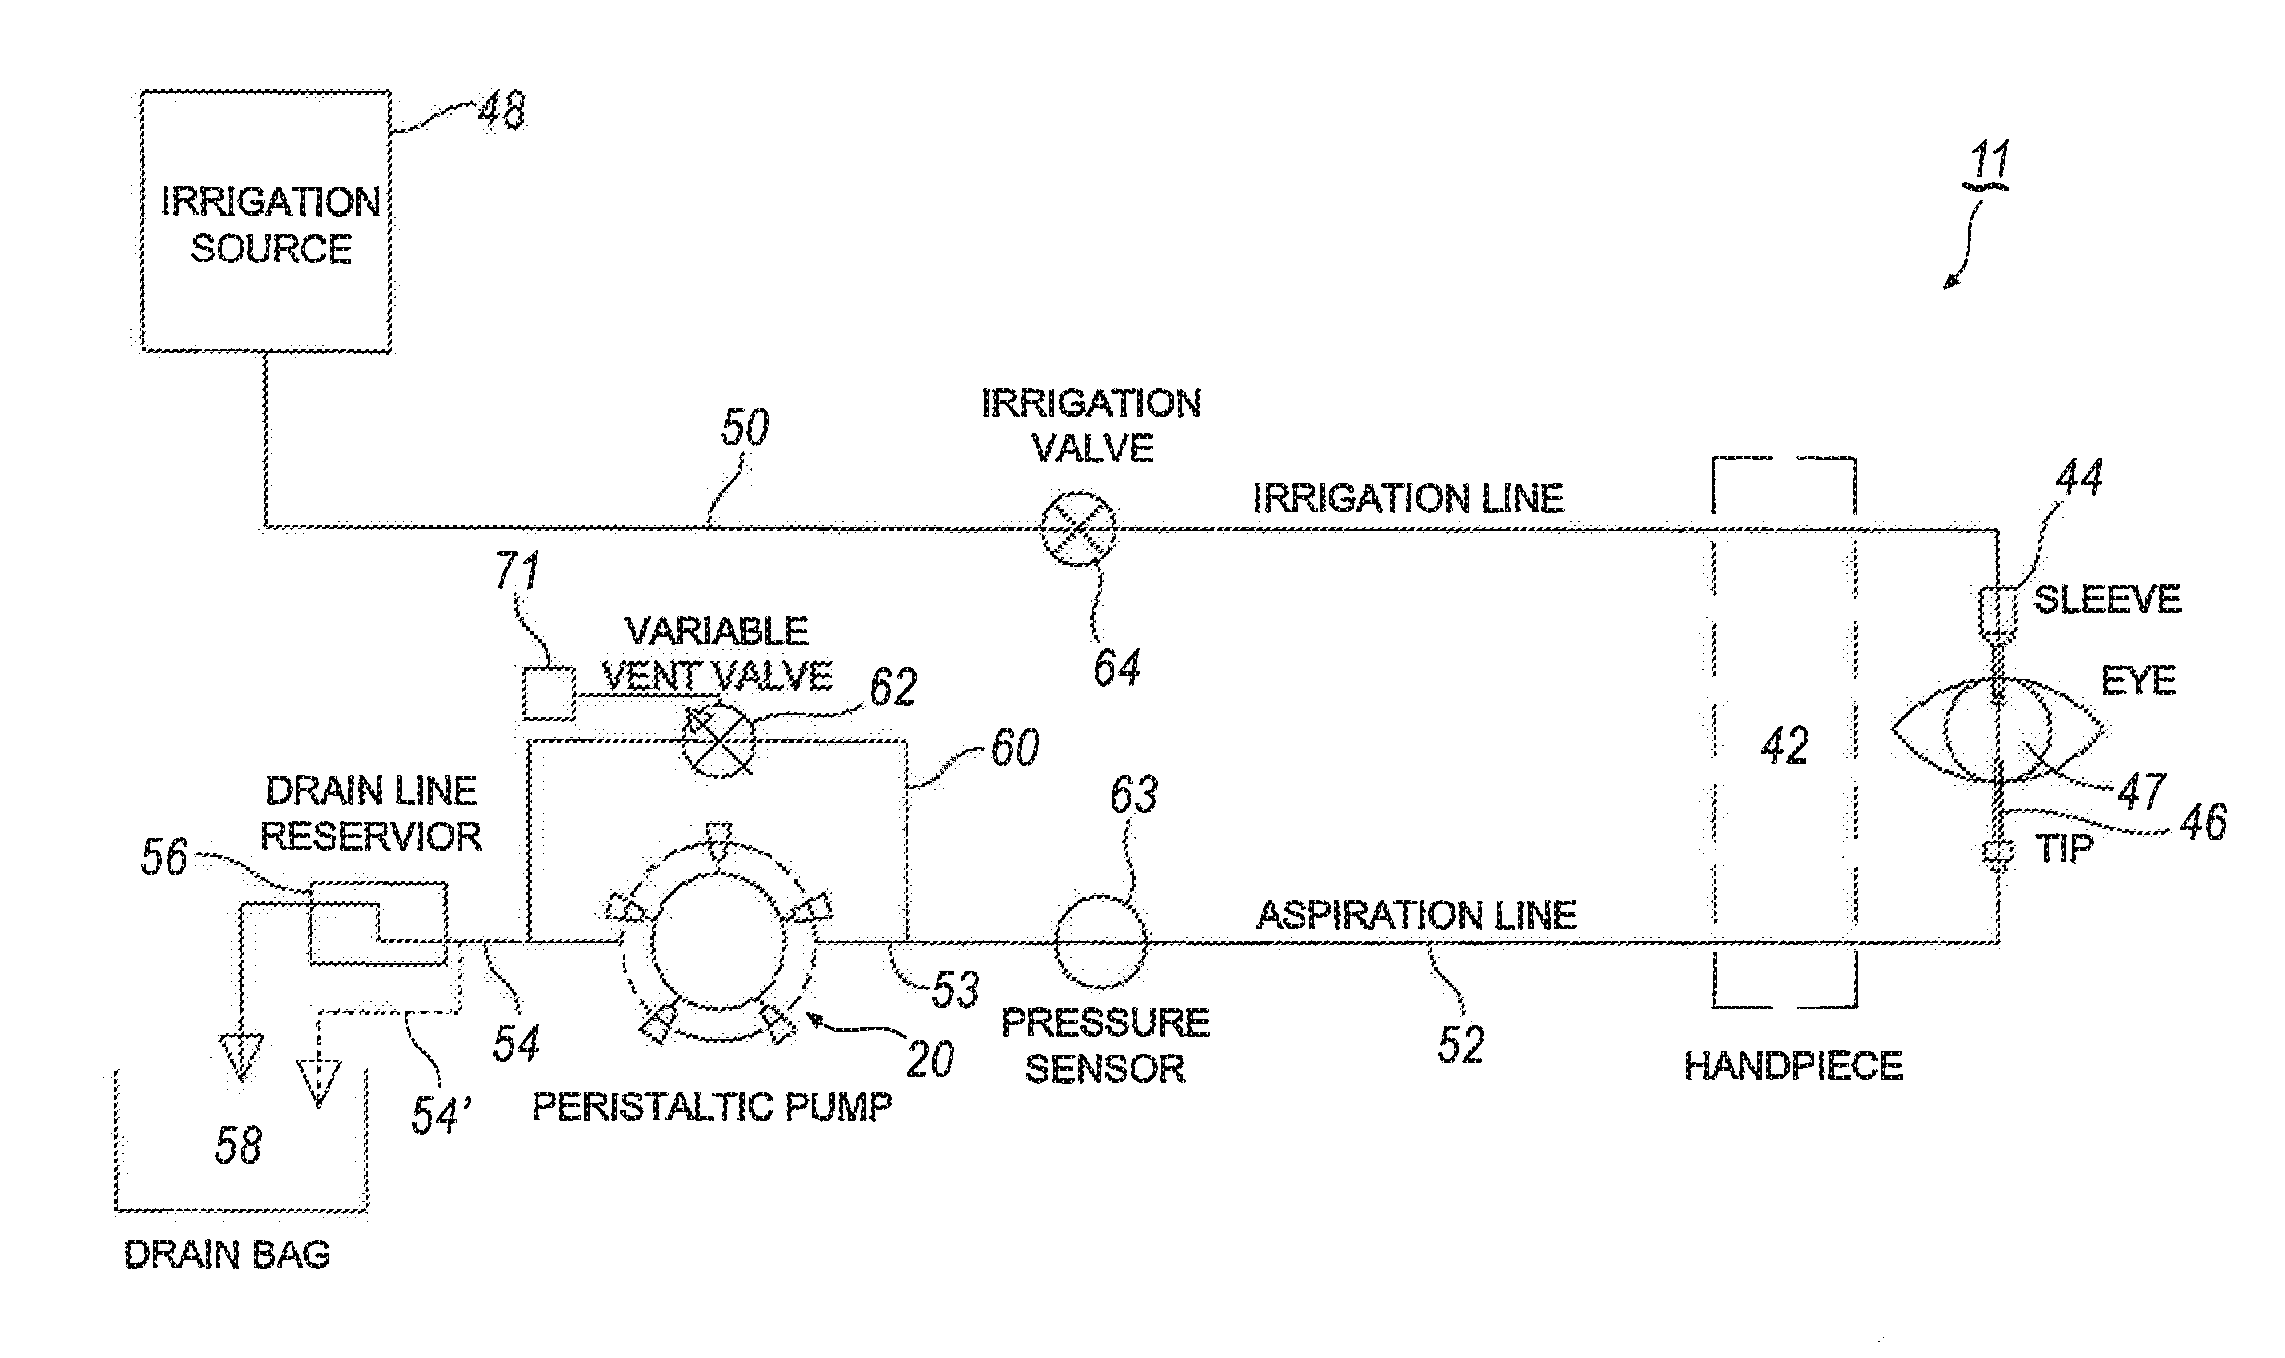 Selectively Moveable Valve Elements for Aspiration and Irrigation Circuits